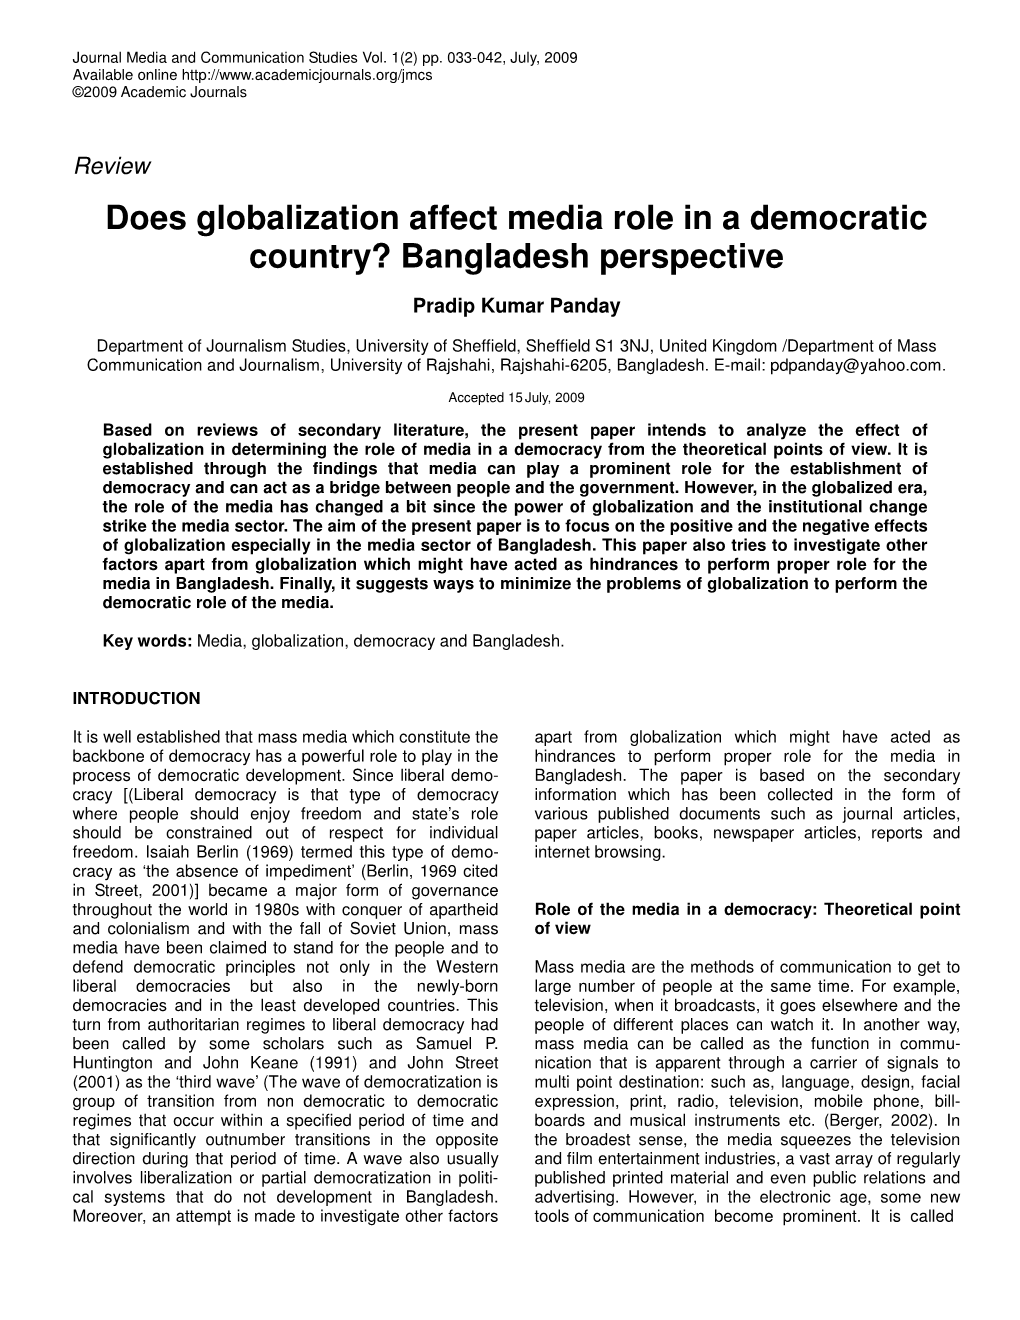 Does Globalization Affect Media Role in a Democratic Country? Bangladesh Perspective